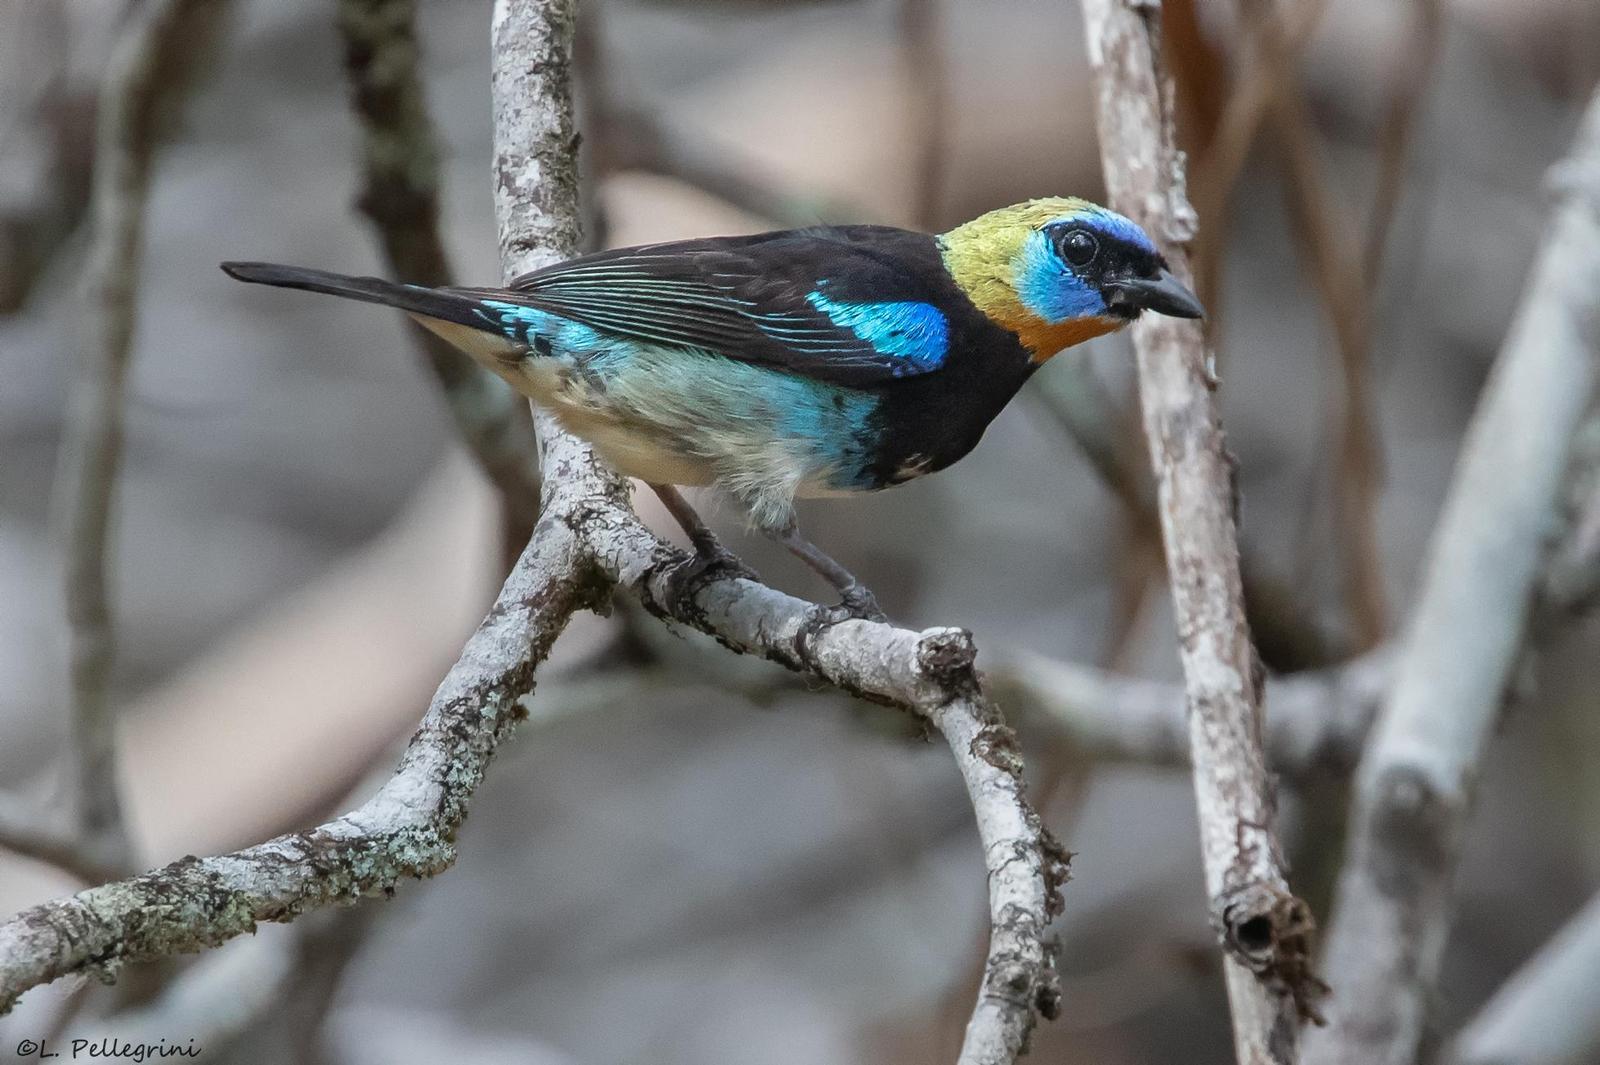 Golden-hooded Tanager Photo by Laurence Pellegrini